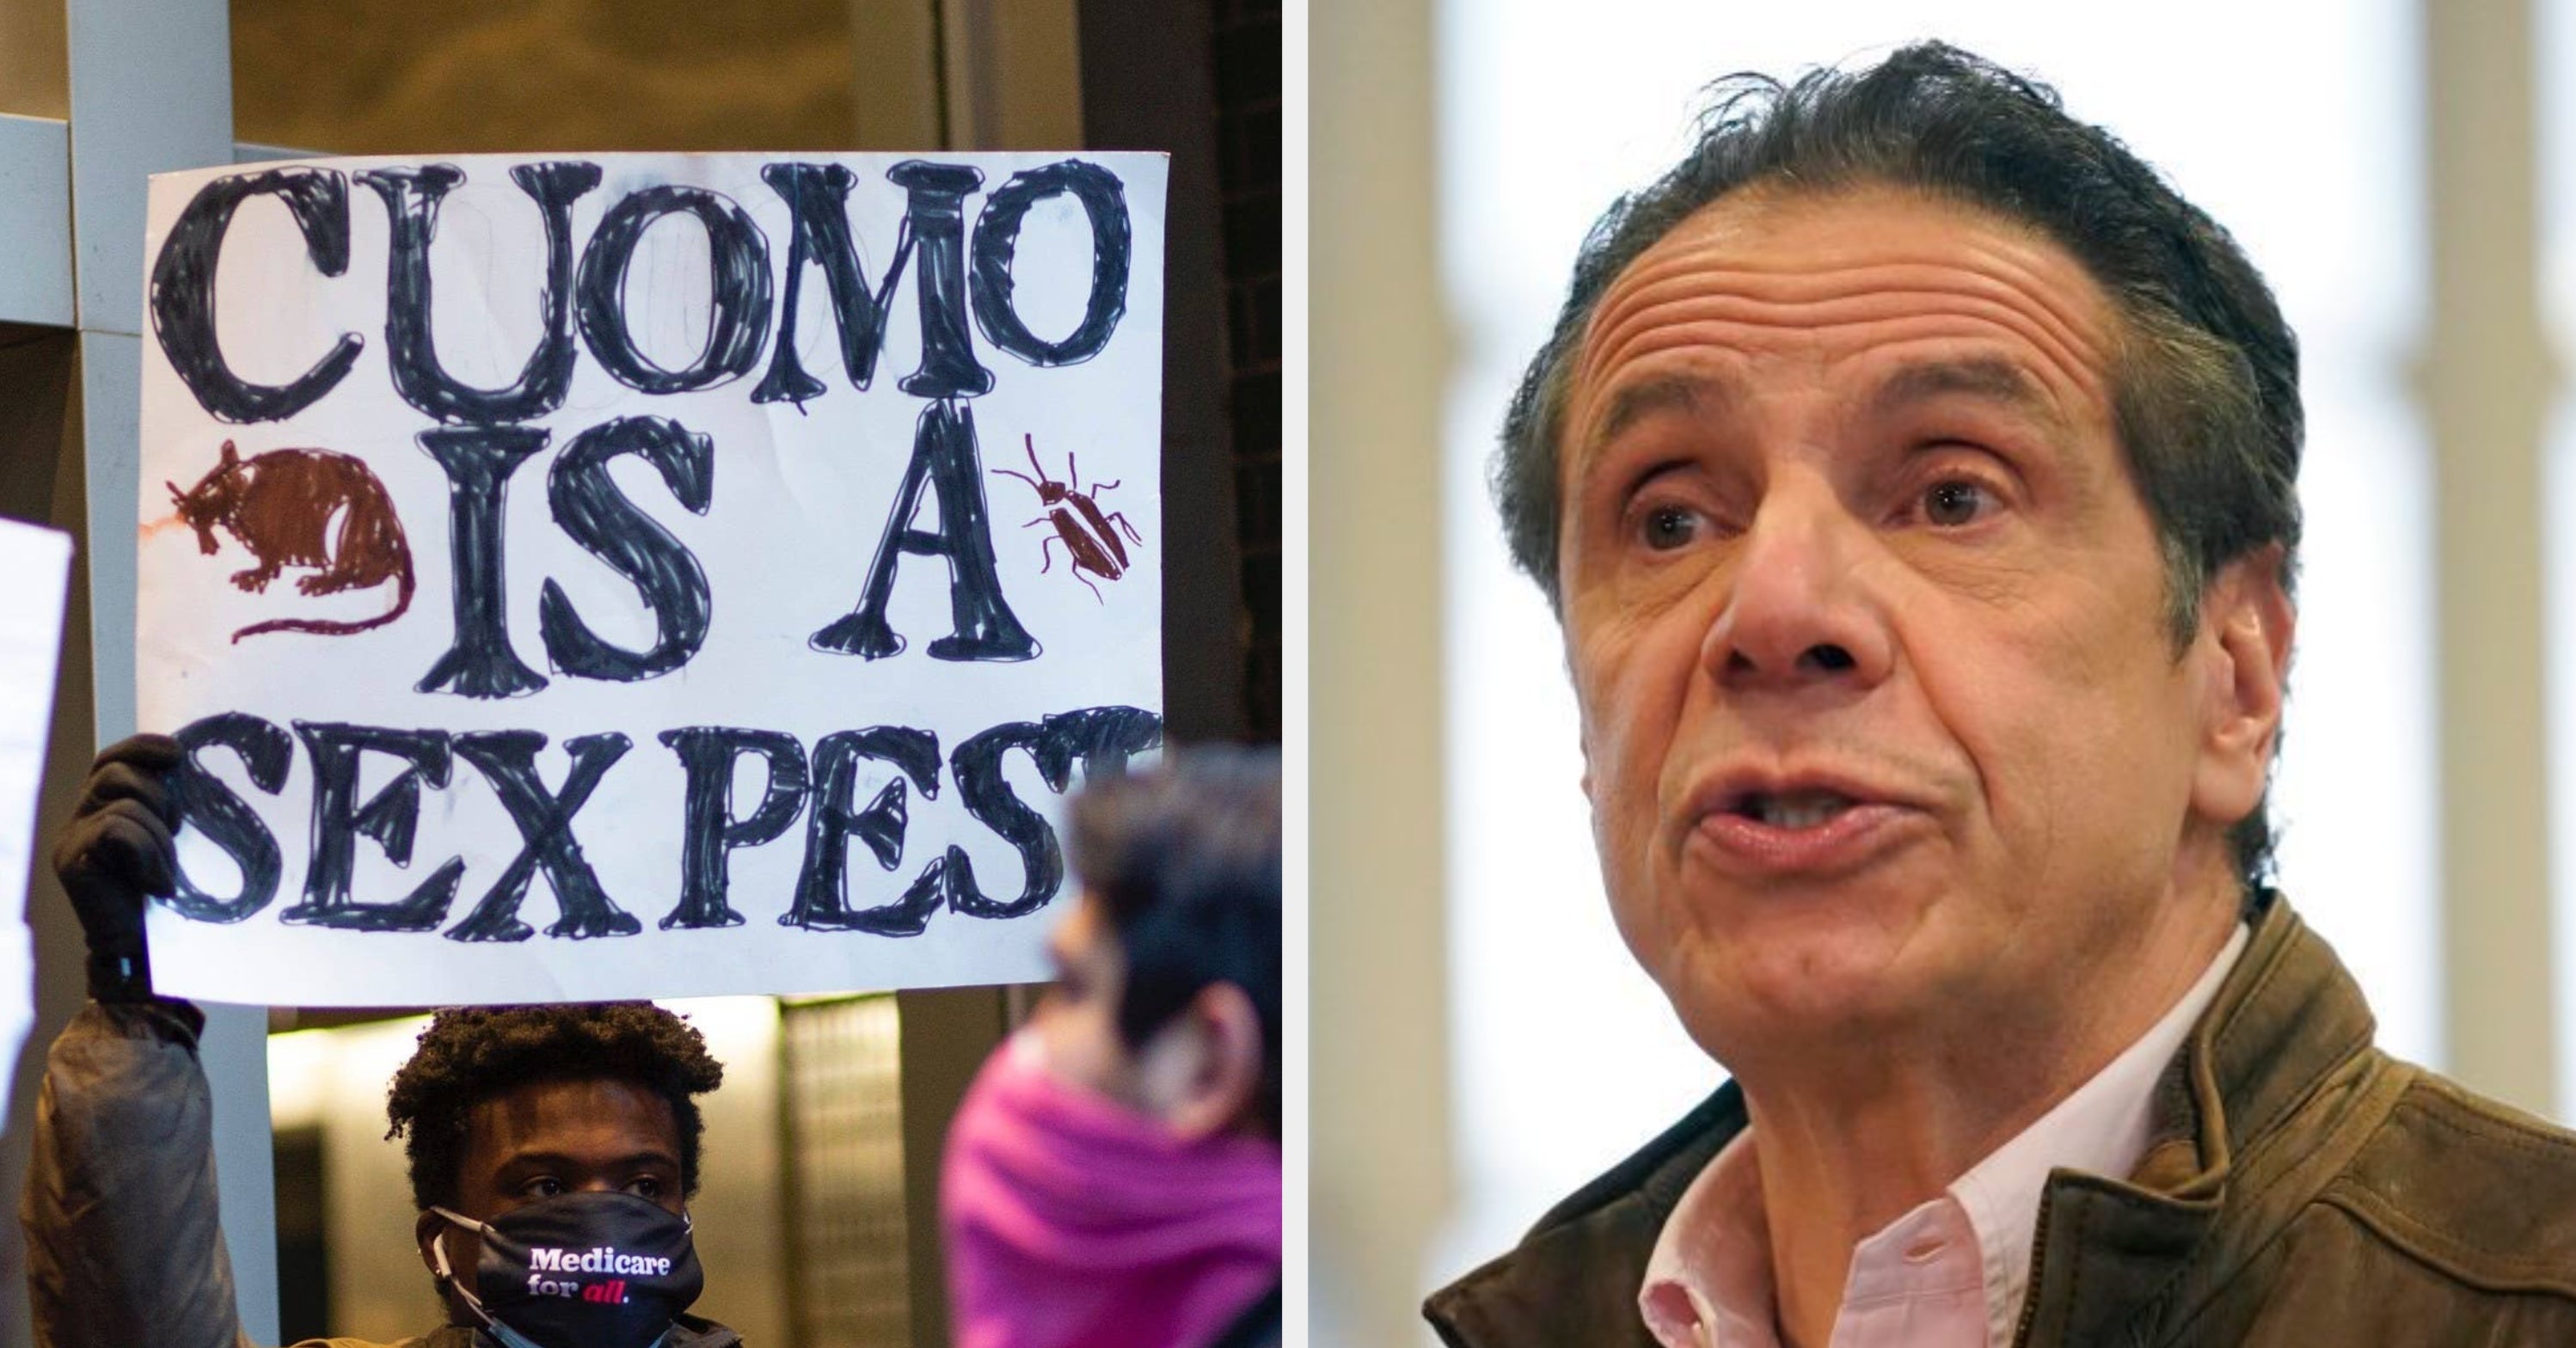 Andrew Cuomo Says He's Sorry - But Won't Resign Over Those Sexual Harassment Claims